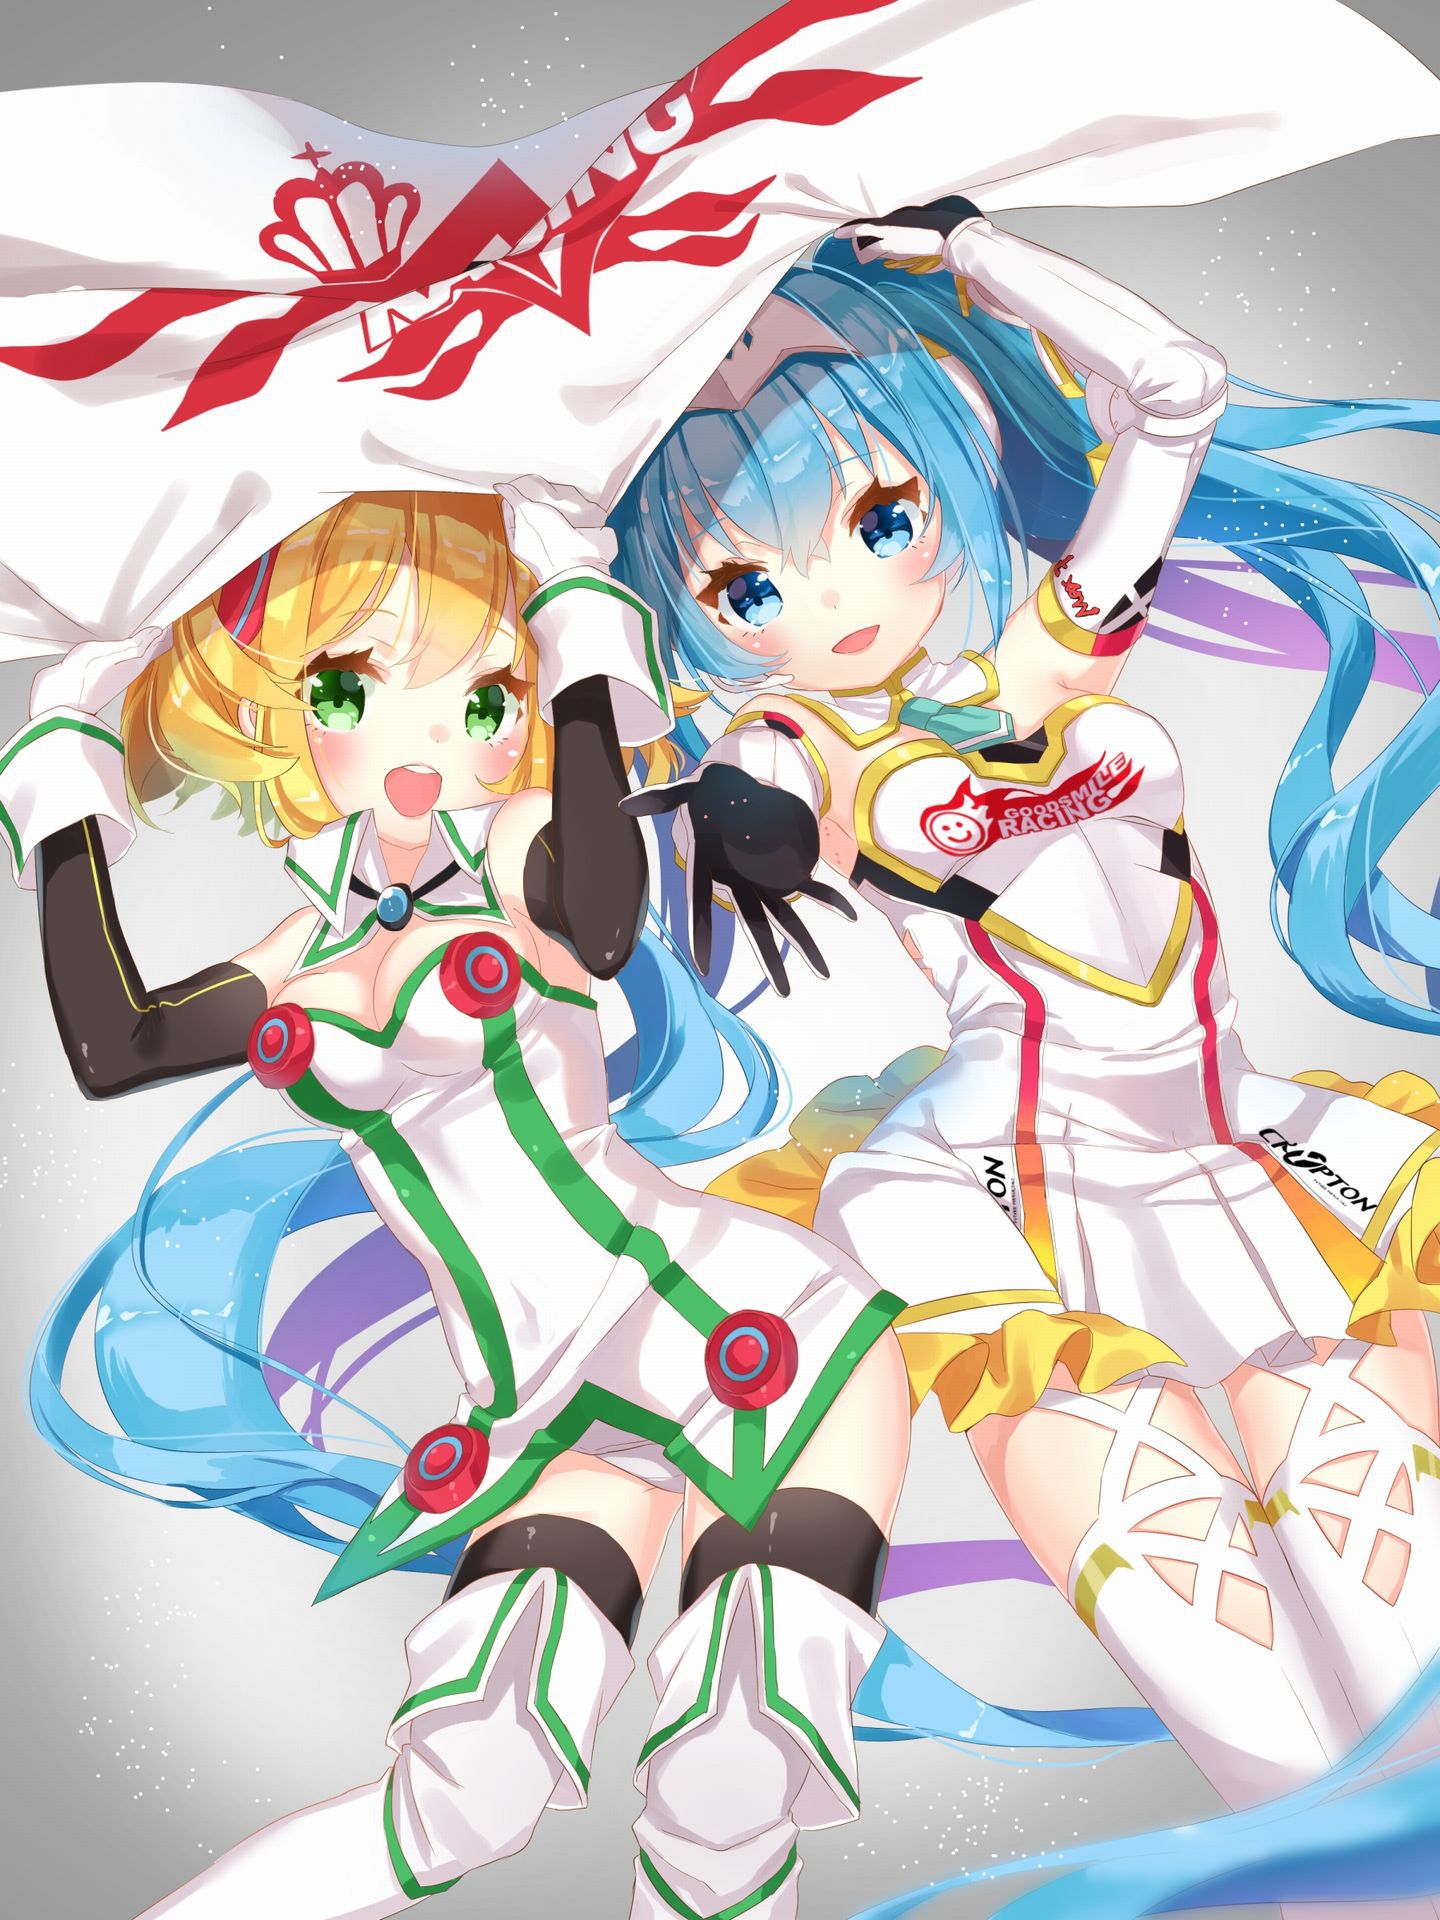 Take a secondary picture with Vocaloid! 12